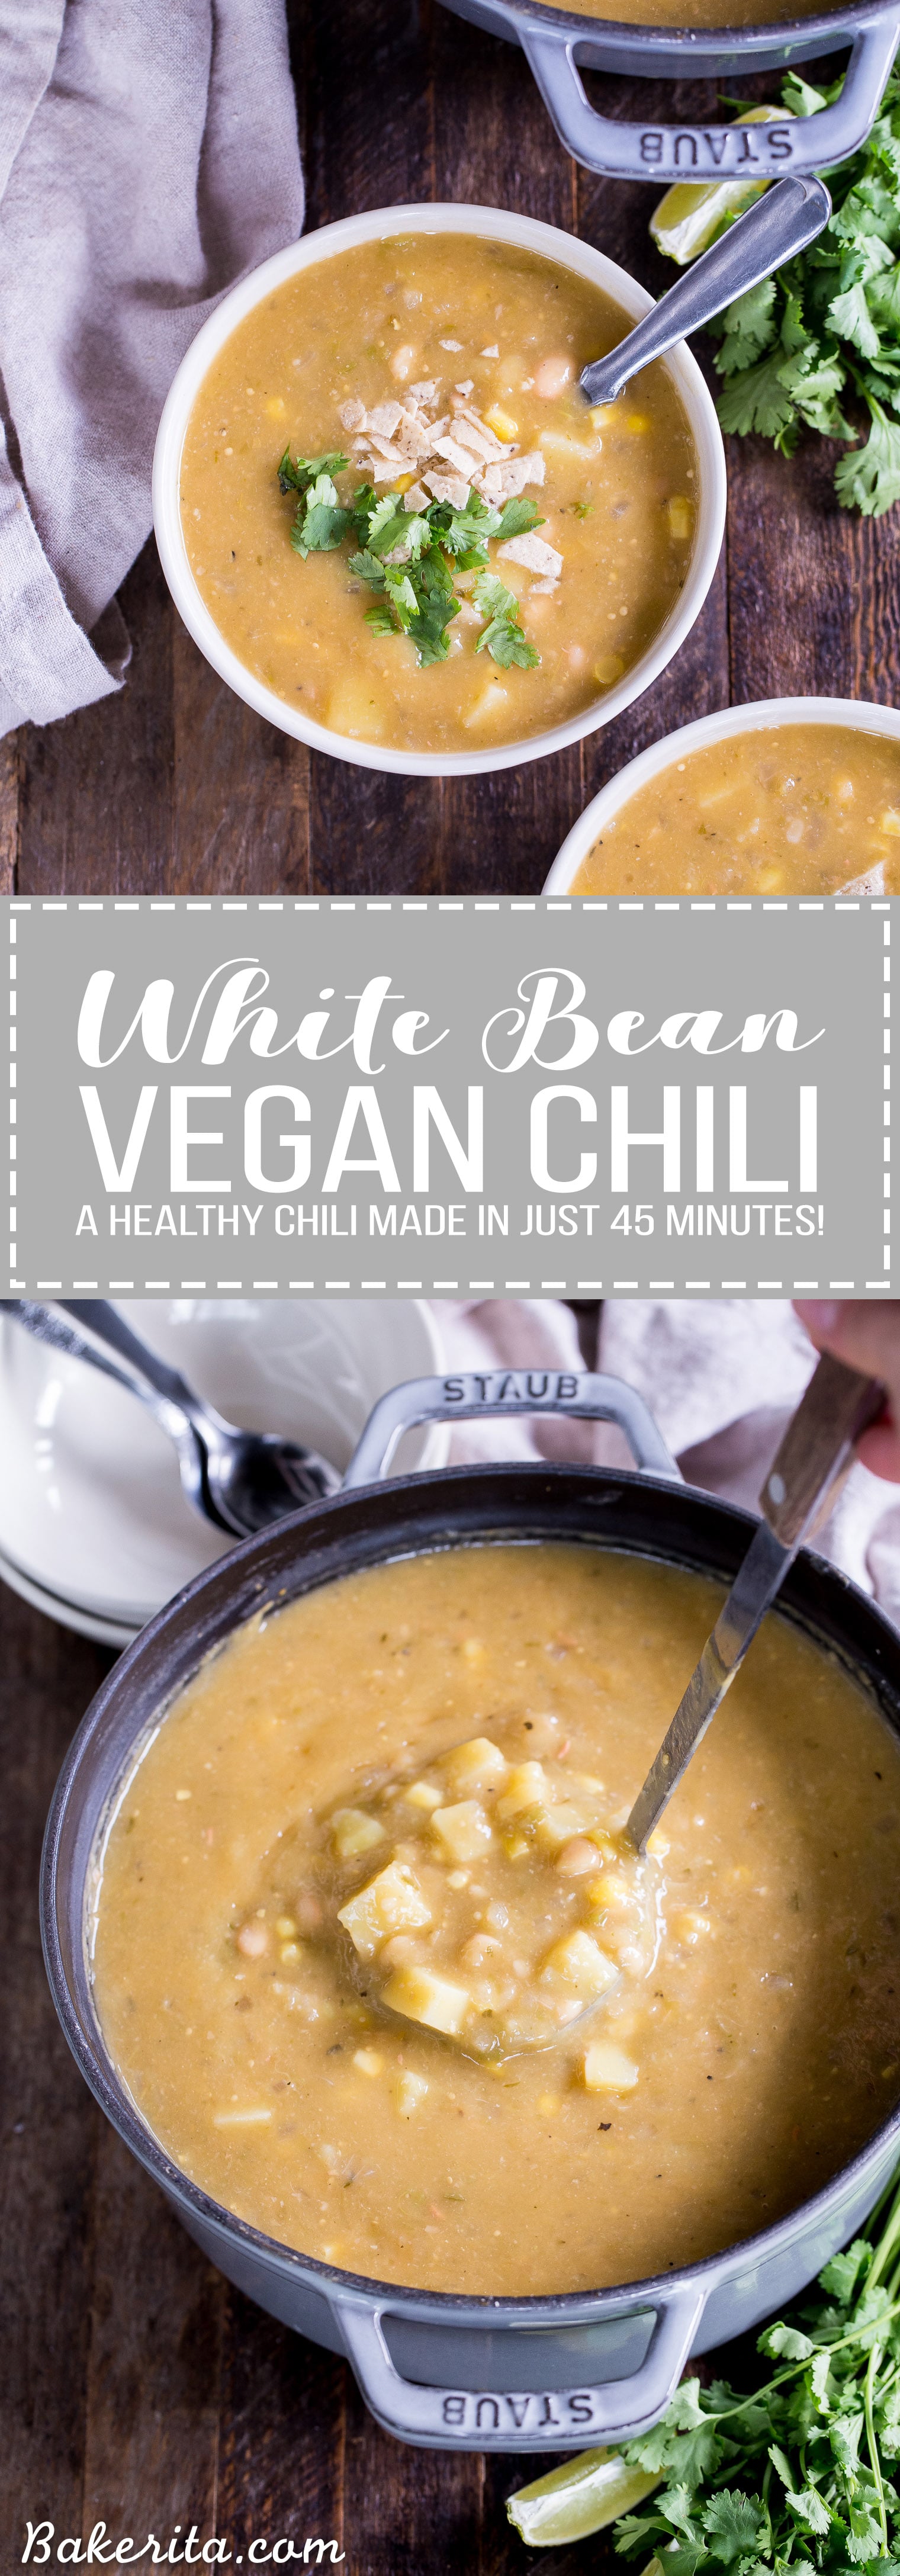 This healthy Vegan White Bean Chili is so hearty and filling, even the carnivores will be asking for more! This creamy chili is gluten-free and dairy-free, and it's loaded with green chiles, potatoes, corn, white beans, and just the right amount of kick.